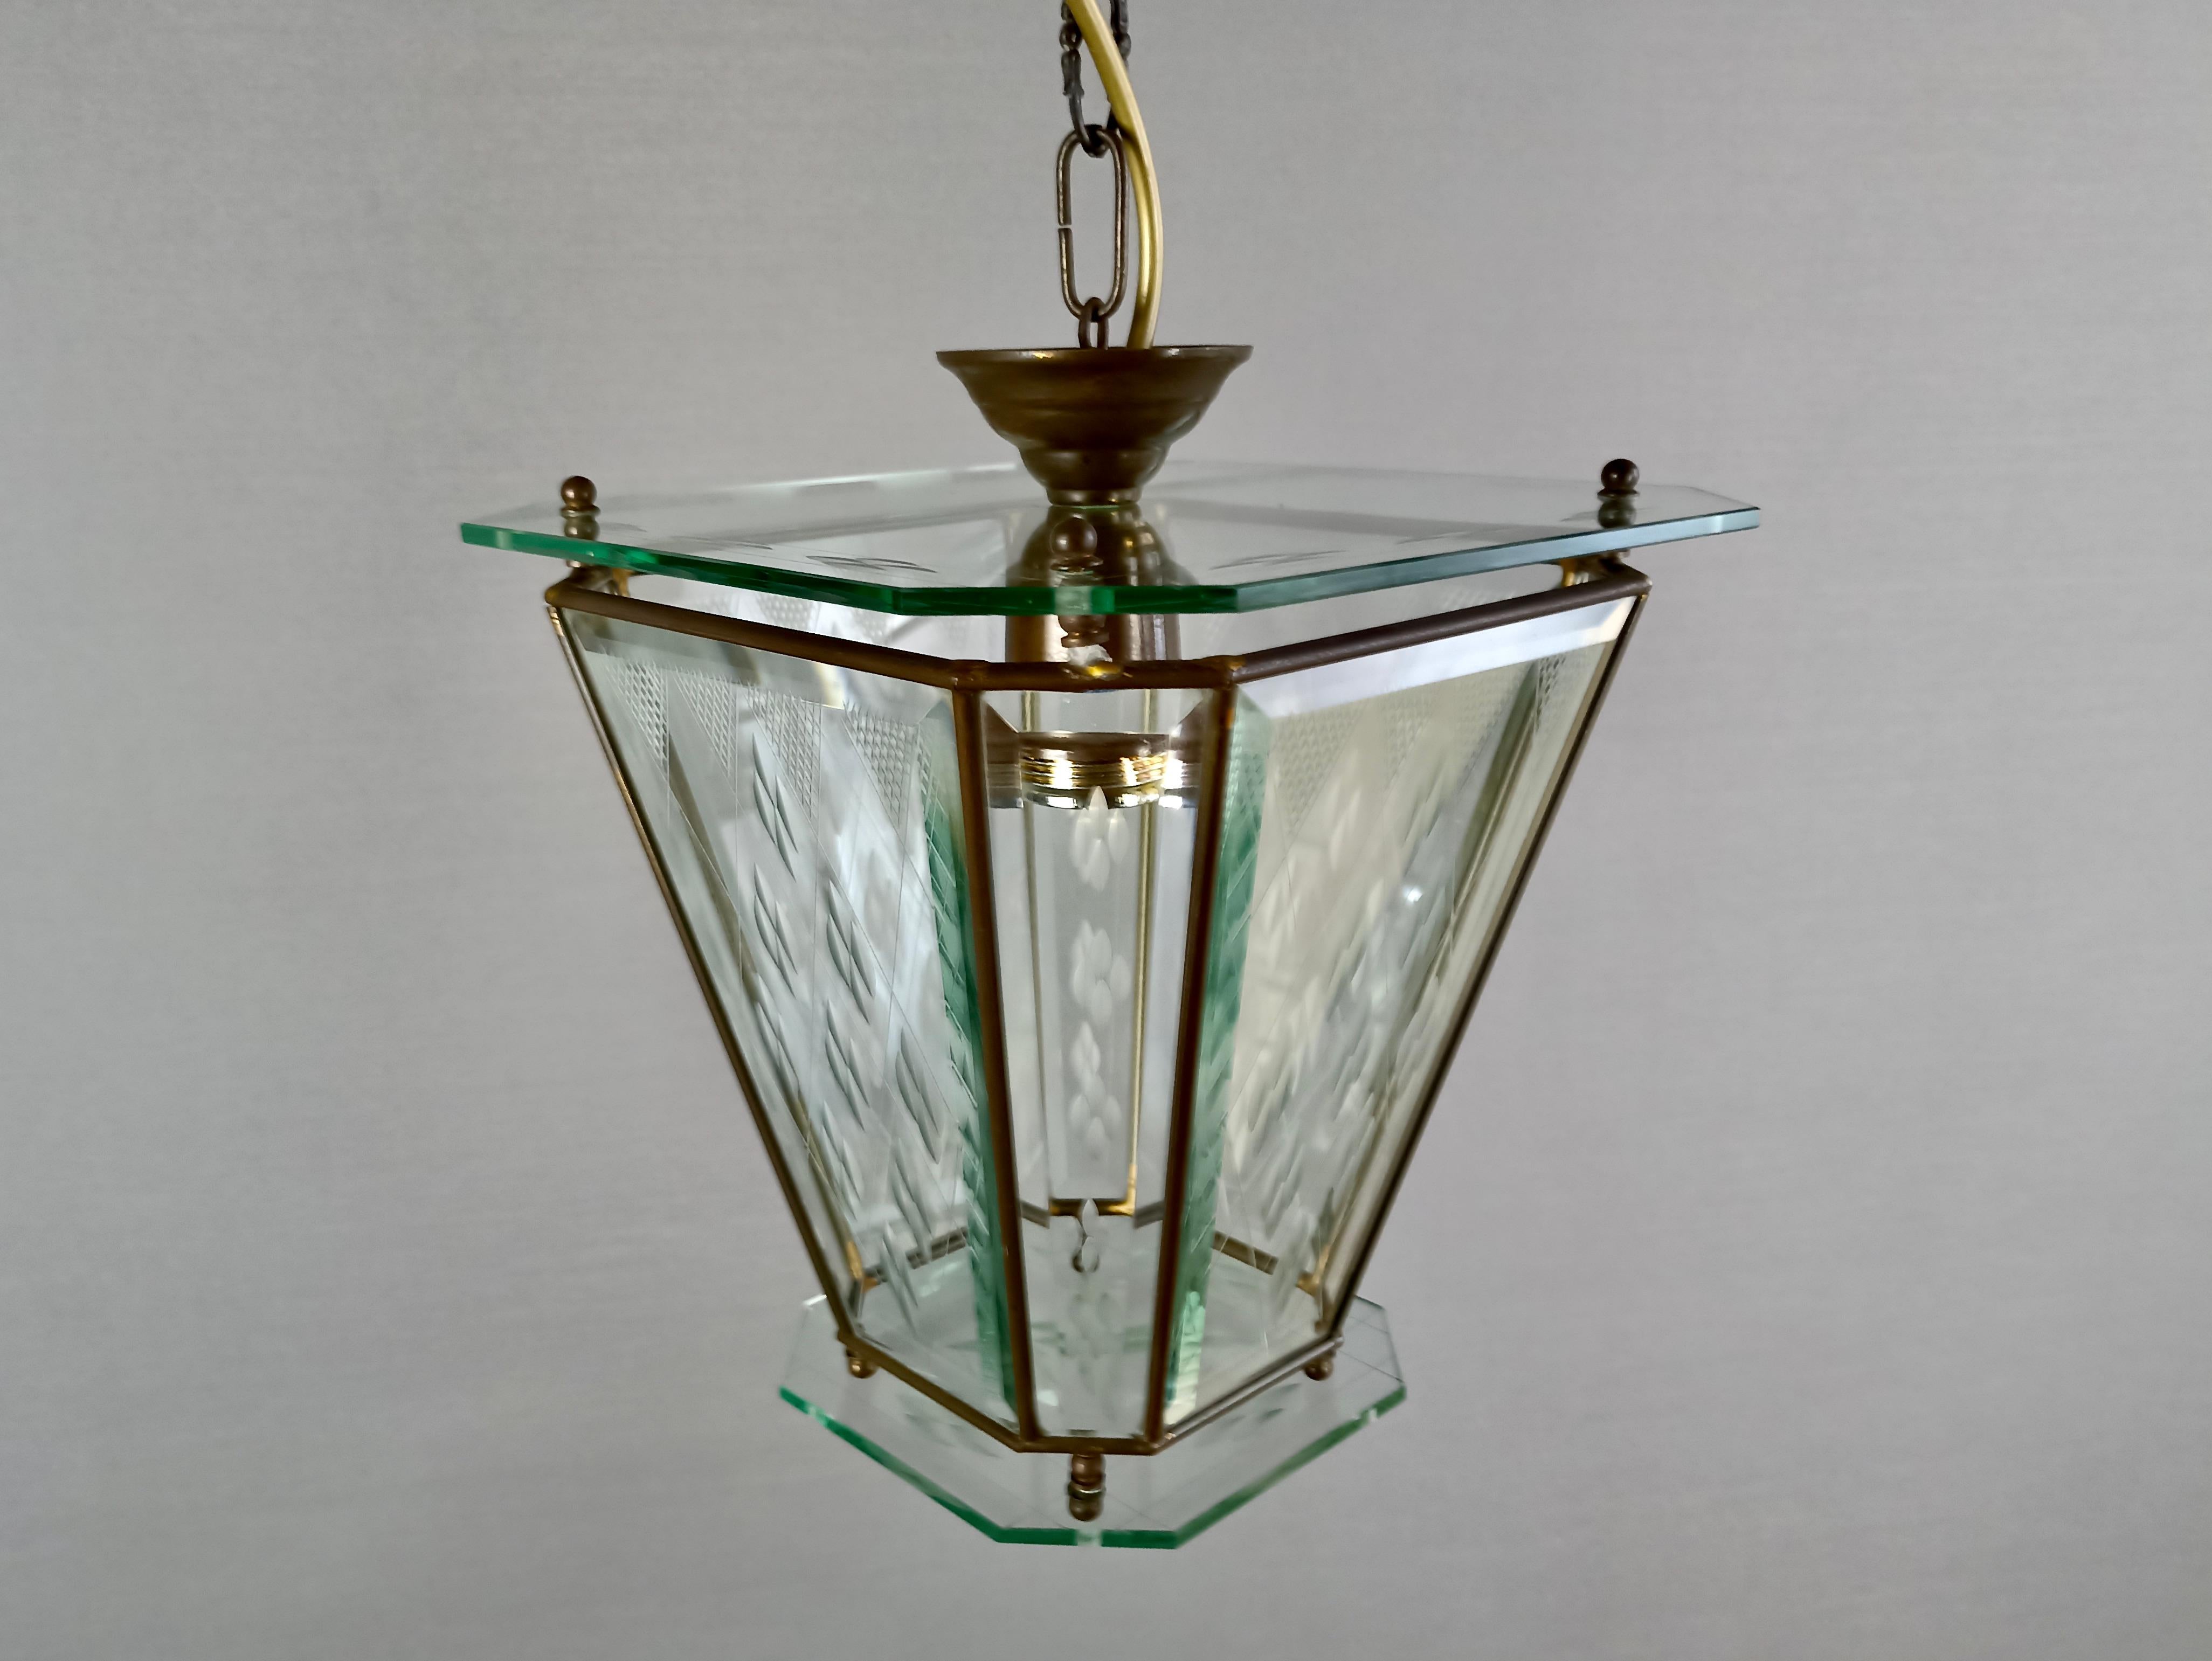 Hand-Crafted Italian single-light lantern from the 1950s. Brass frame and engraved glass. For Sale